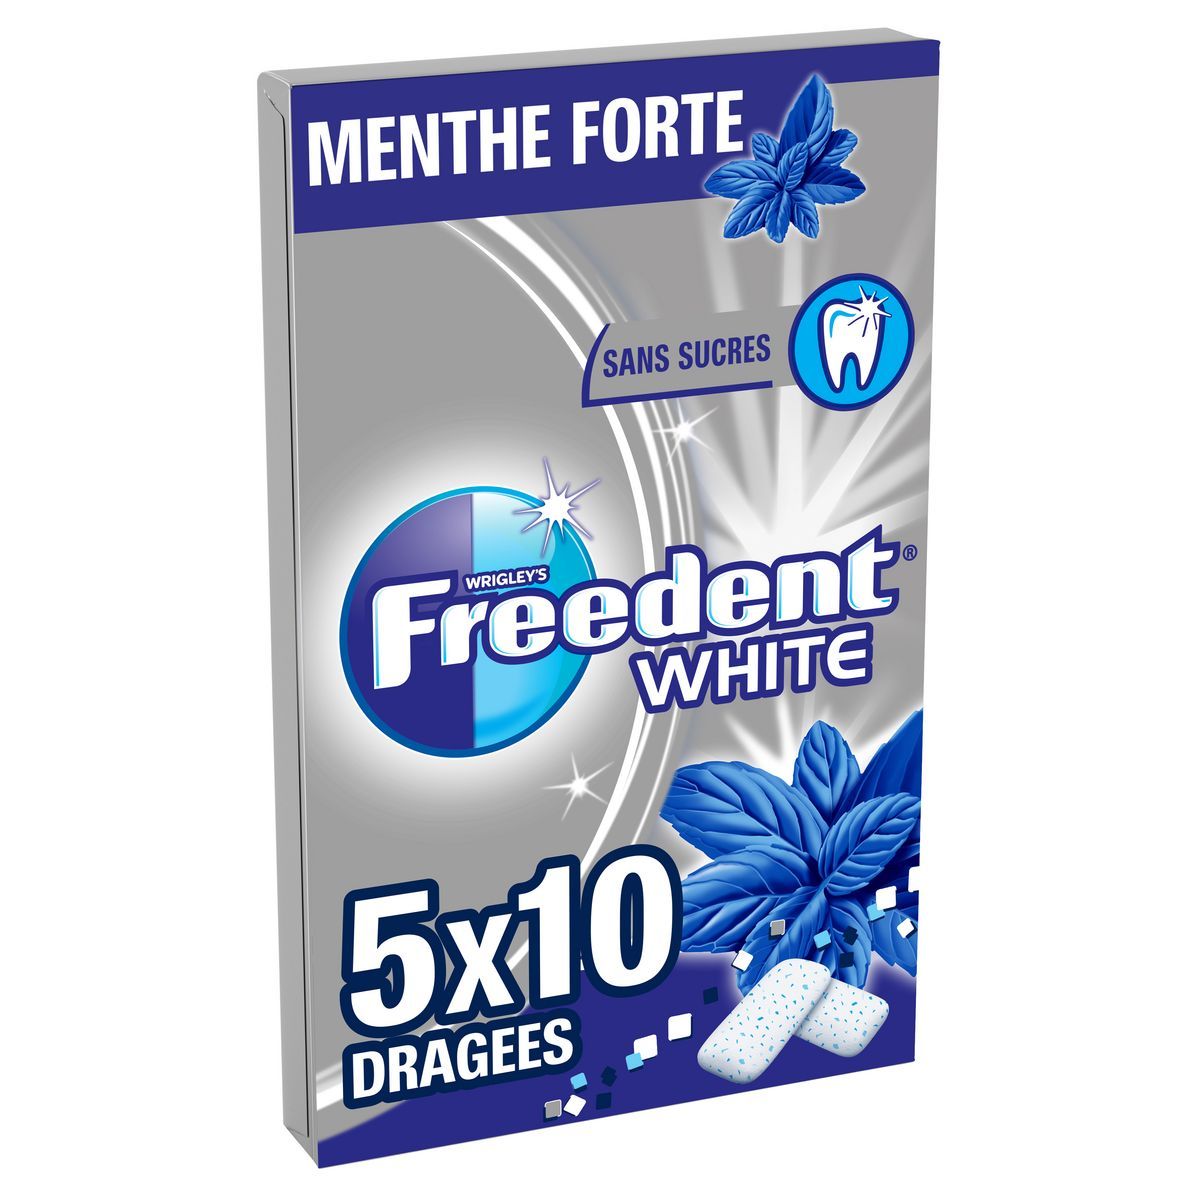 CHEWING GUM MENTHE FORTE FREEDENT WHITE